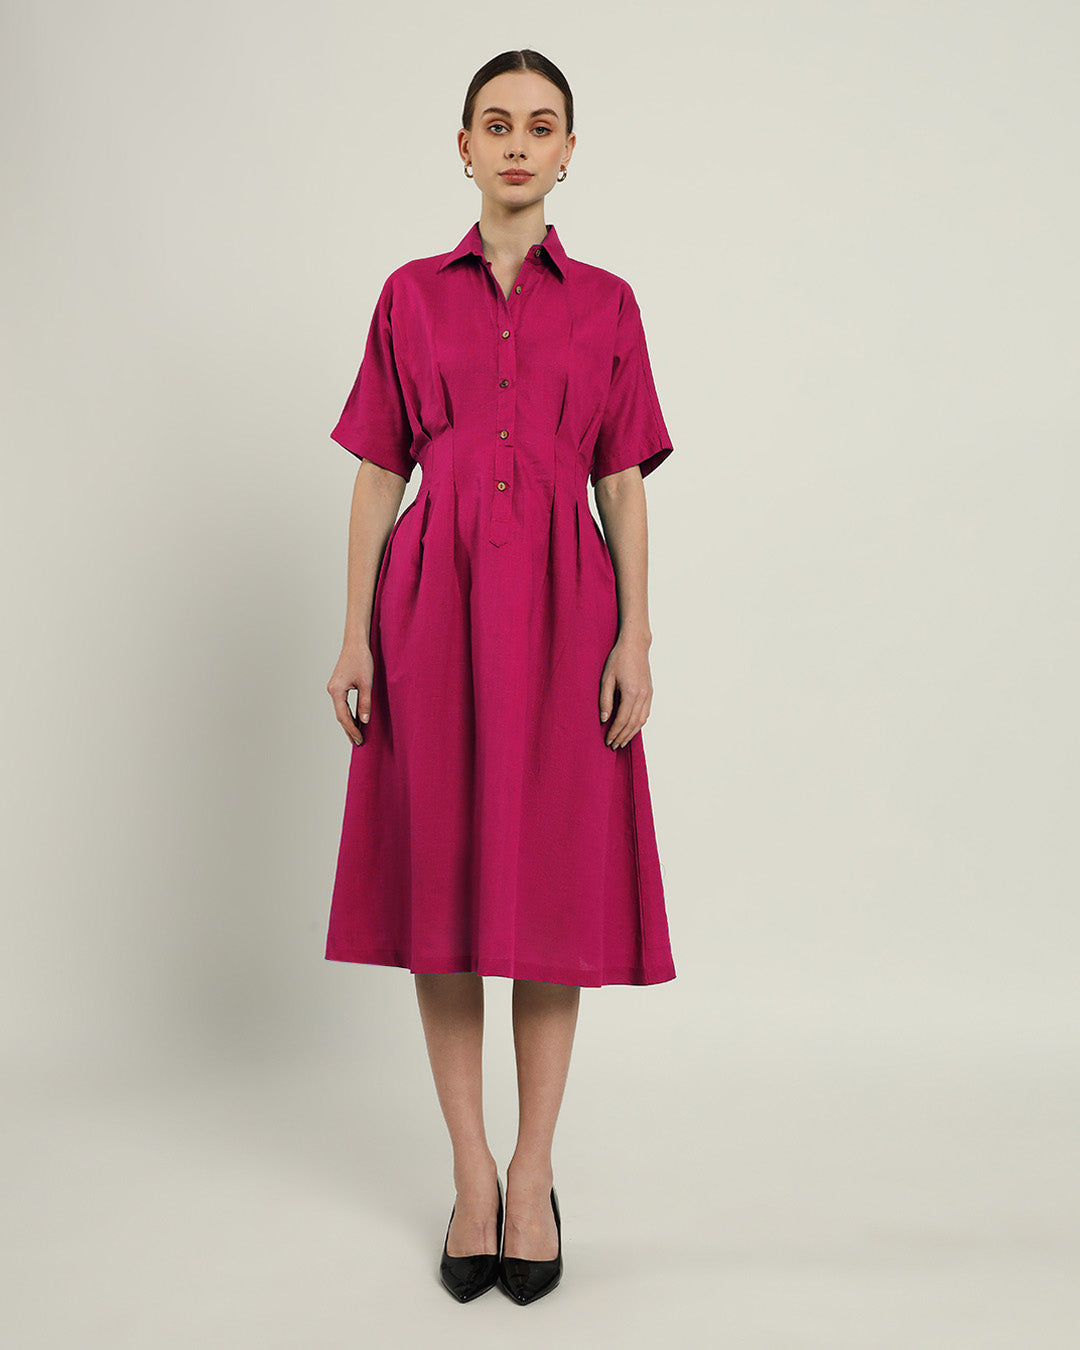 The Salford Berry Dress